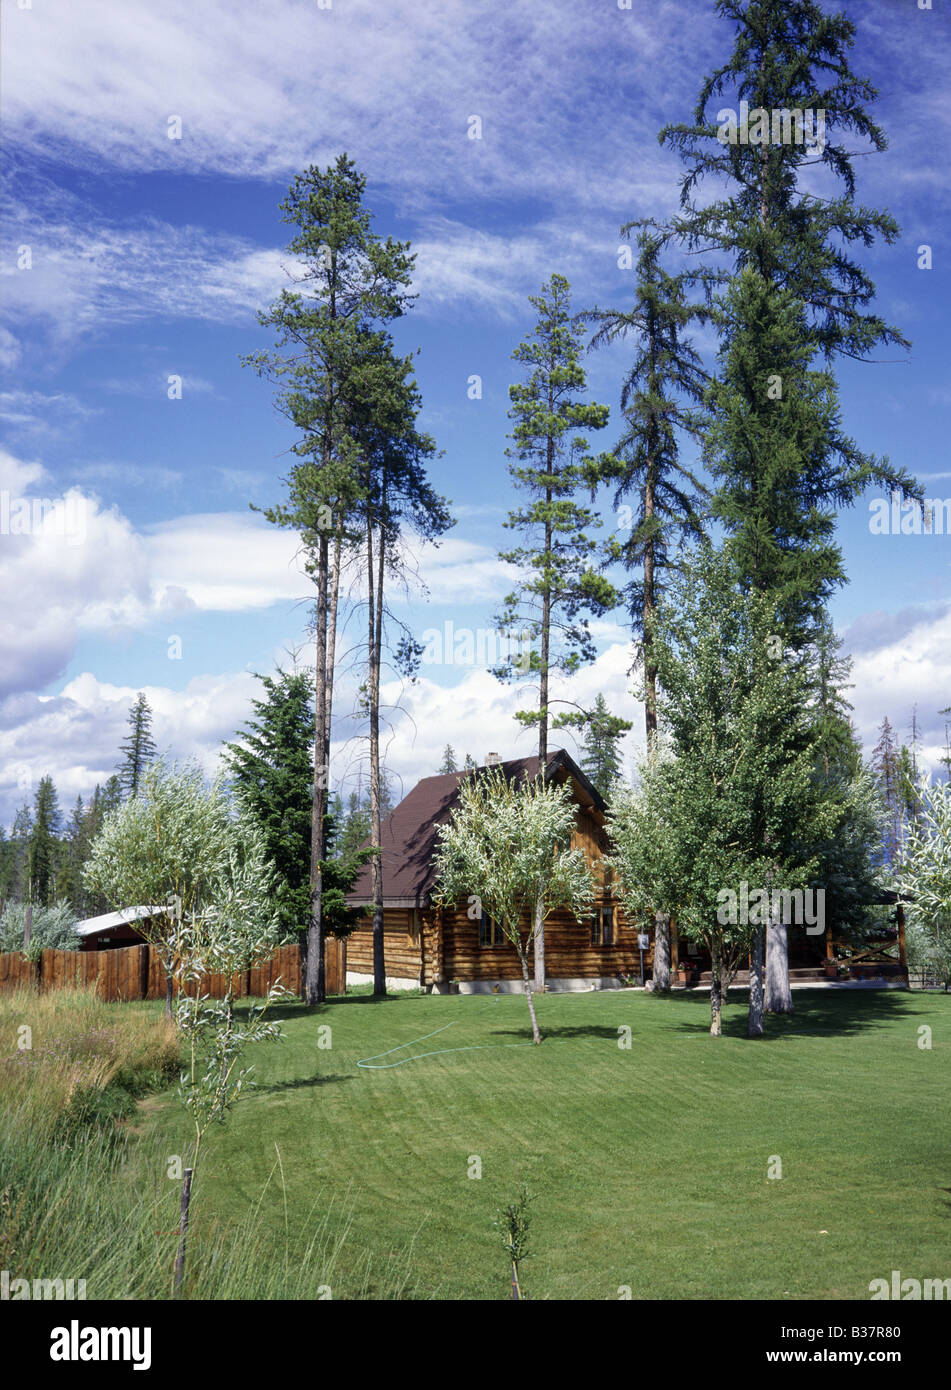 Log house in trees Steep pitched roof Lawn Hosepipe KIMBERLEY BRITISH COLUMBIA CANADA Stock Photo